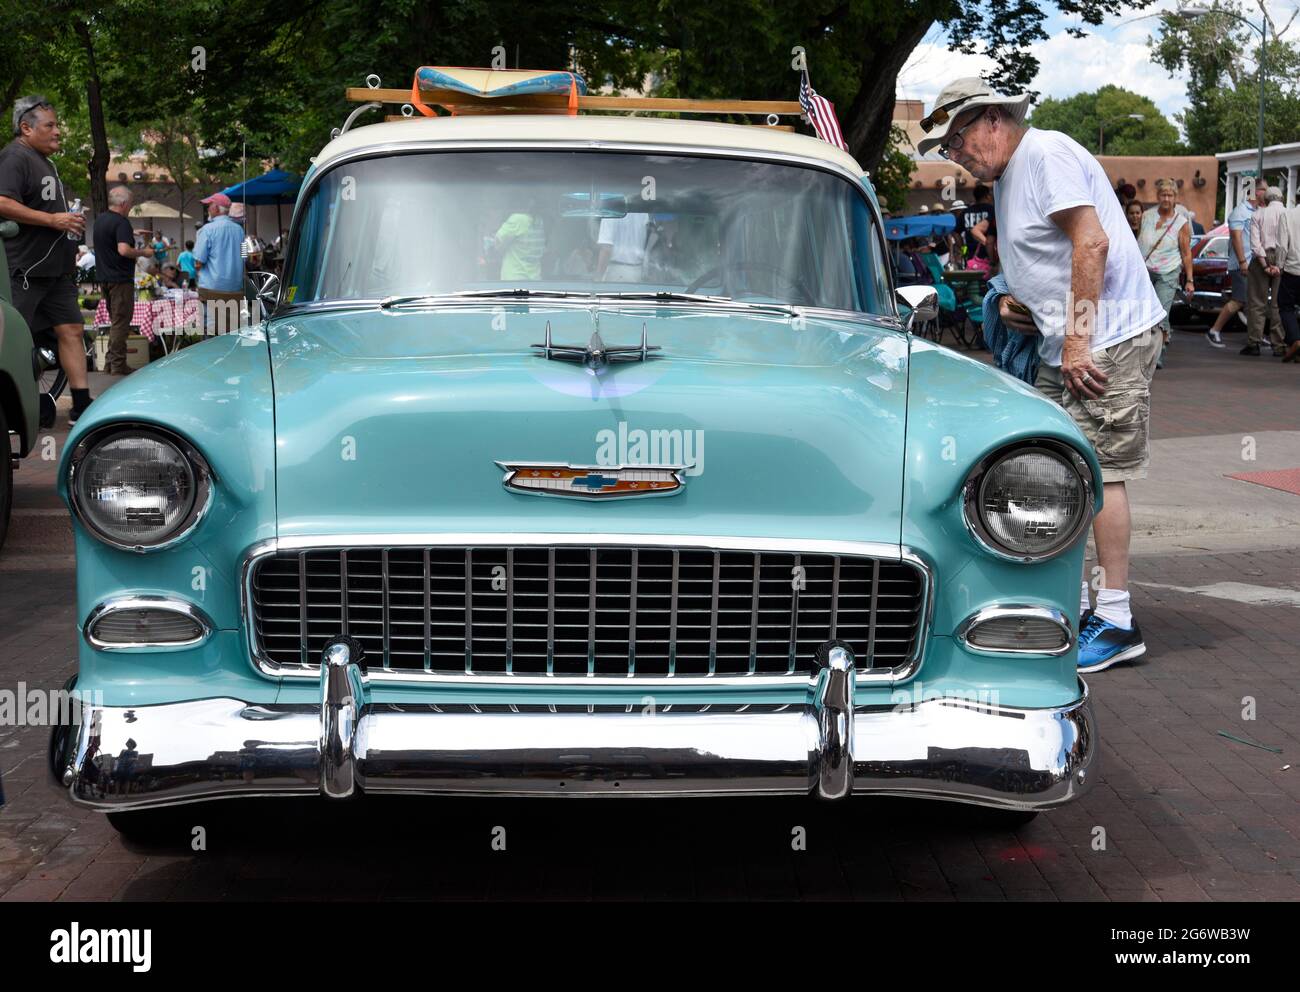 A 1956 Chevrolet station wagon on display at a Fourth of July classic car show in Santa Fe, New Mexico. Stock Photo